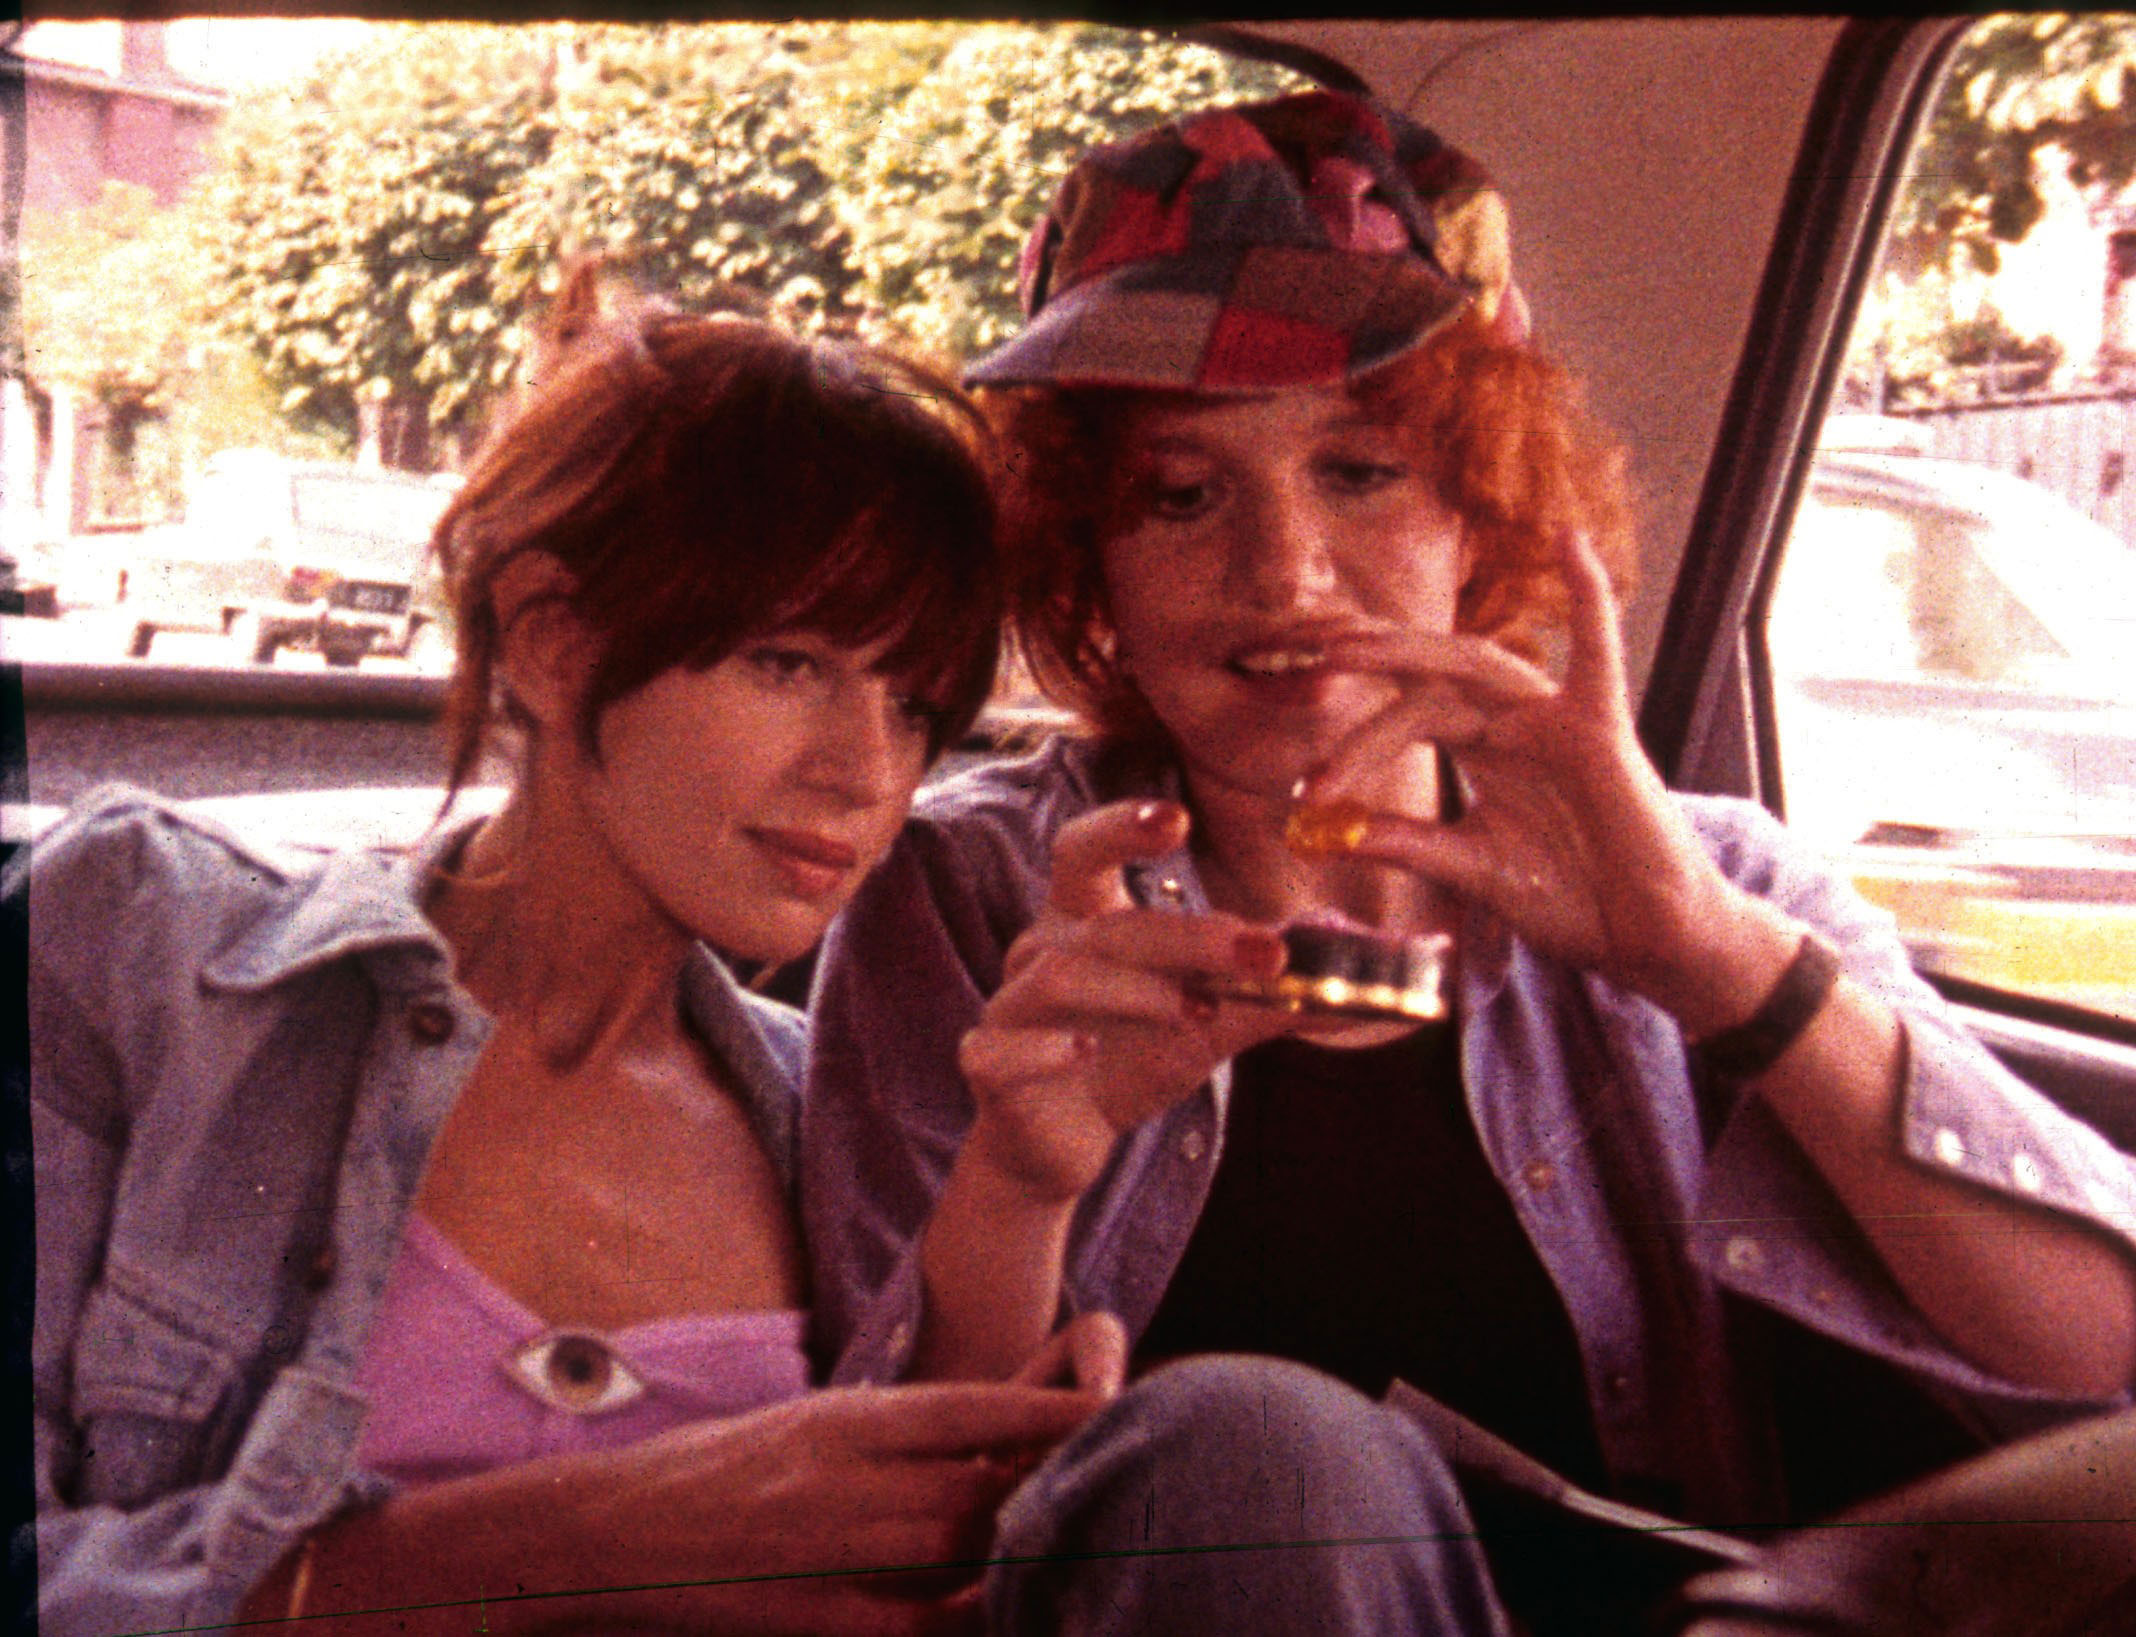 Juliet Berto as Celine and Dominique Labourier as Julie in <i>Celine and Julie Go Boating</i>. (Mary Evans/Ronald Grant Archive/Everett Collection)